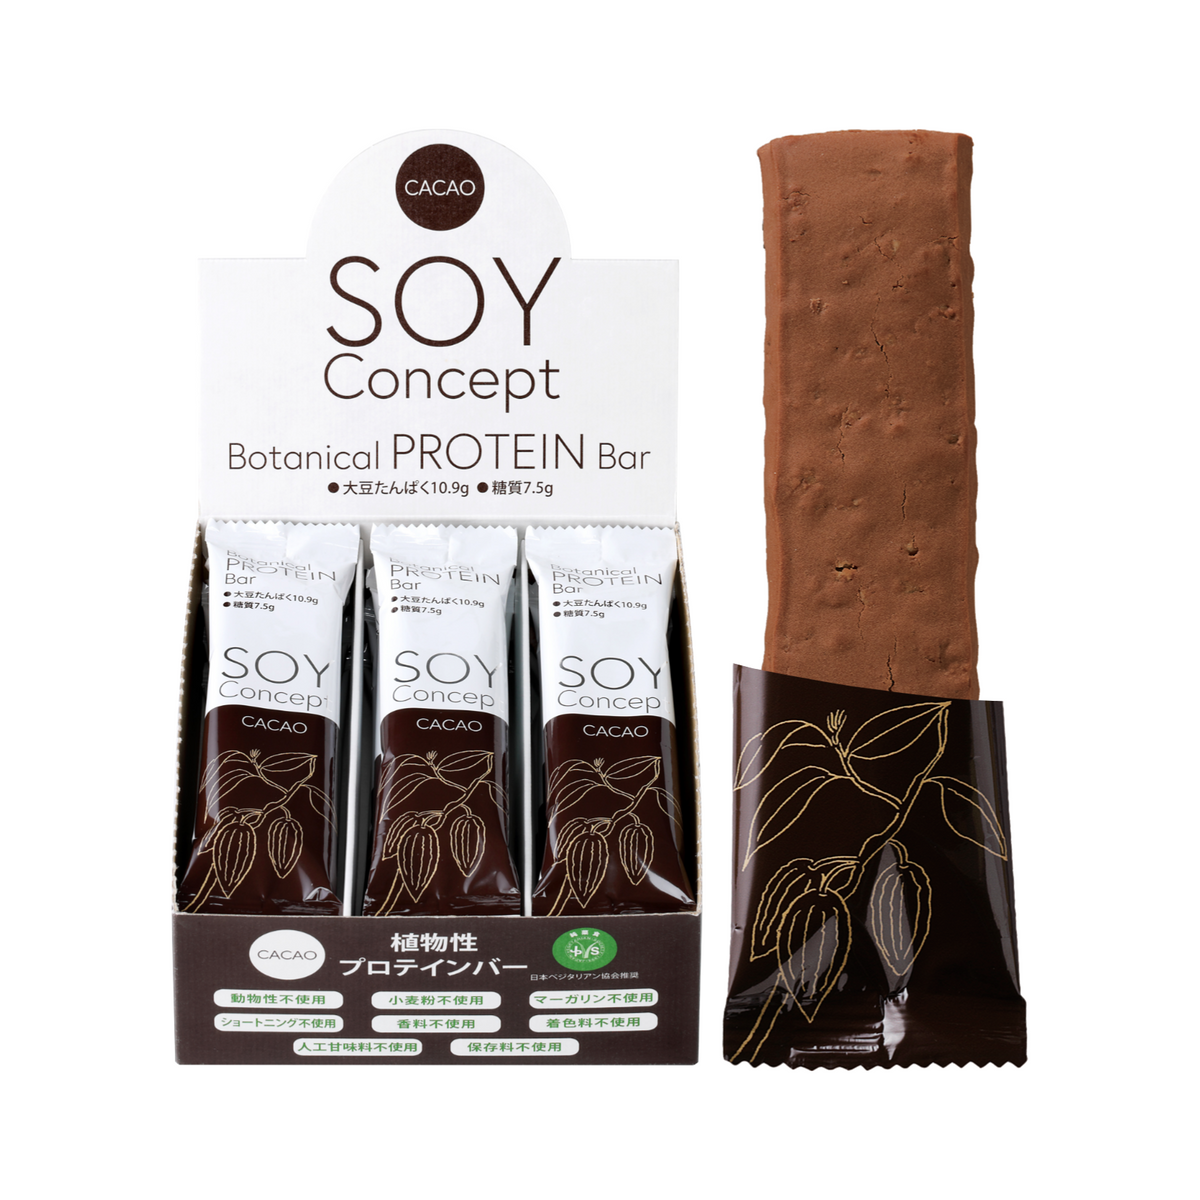 SOY Concept Cacao カカオ お得なセット - Wellness Tree